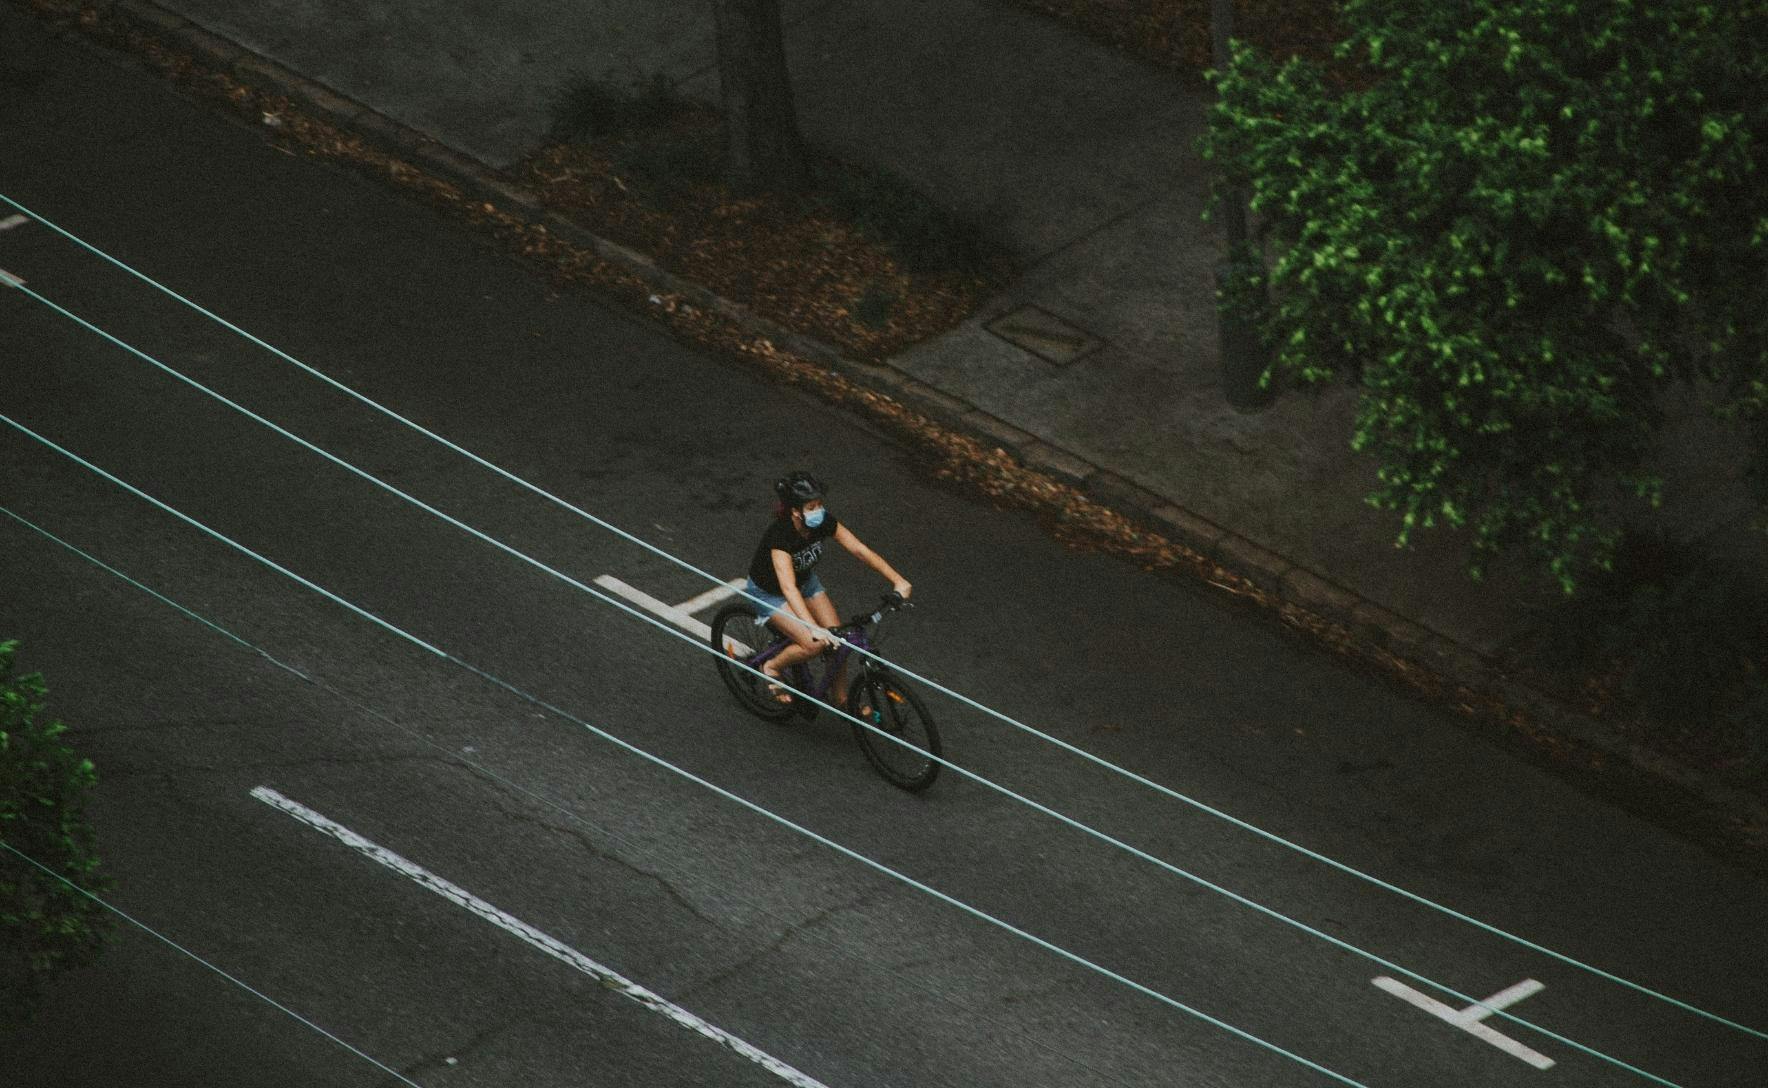 aerial shot of a woman riding a bike on a road. She is wearing a mask and a helmet. There is no one else in the image